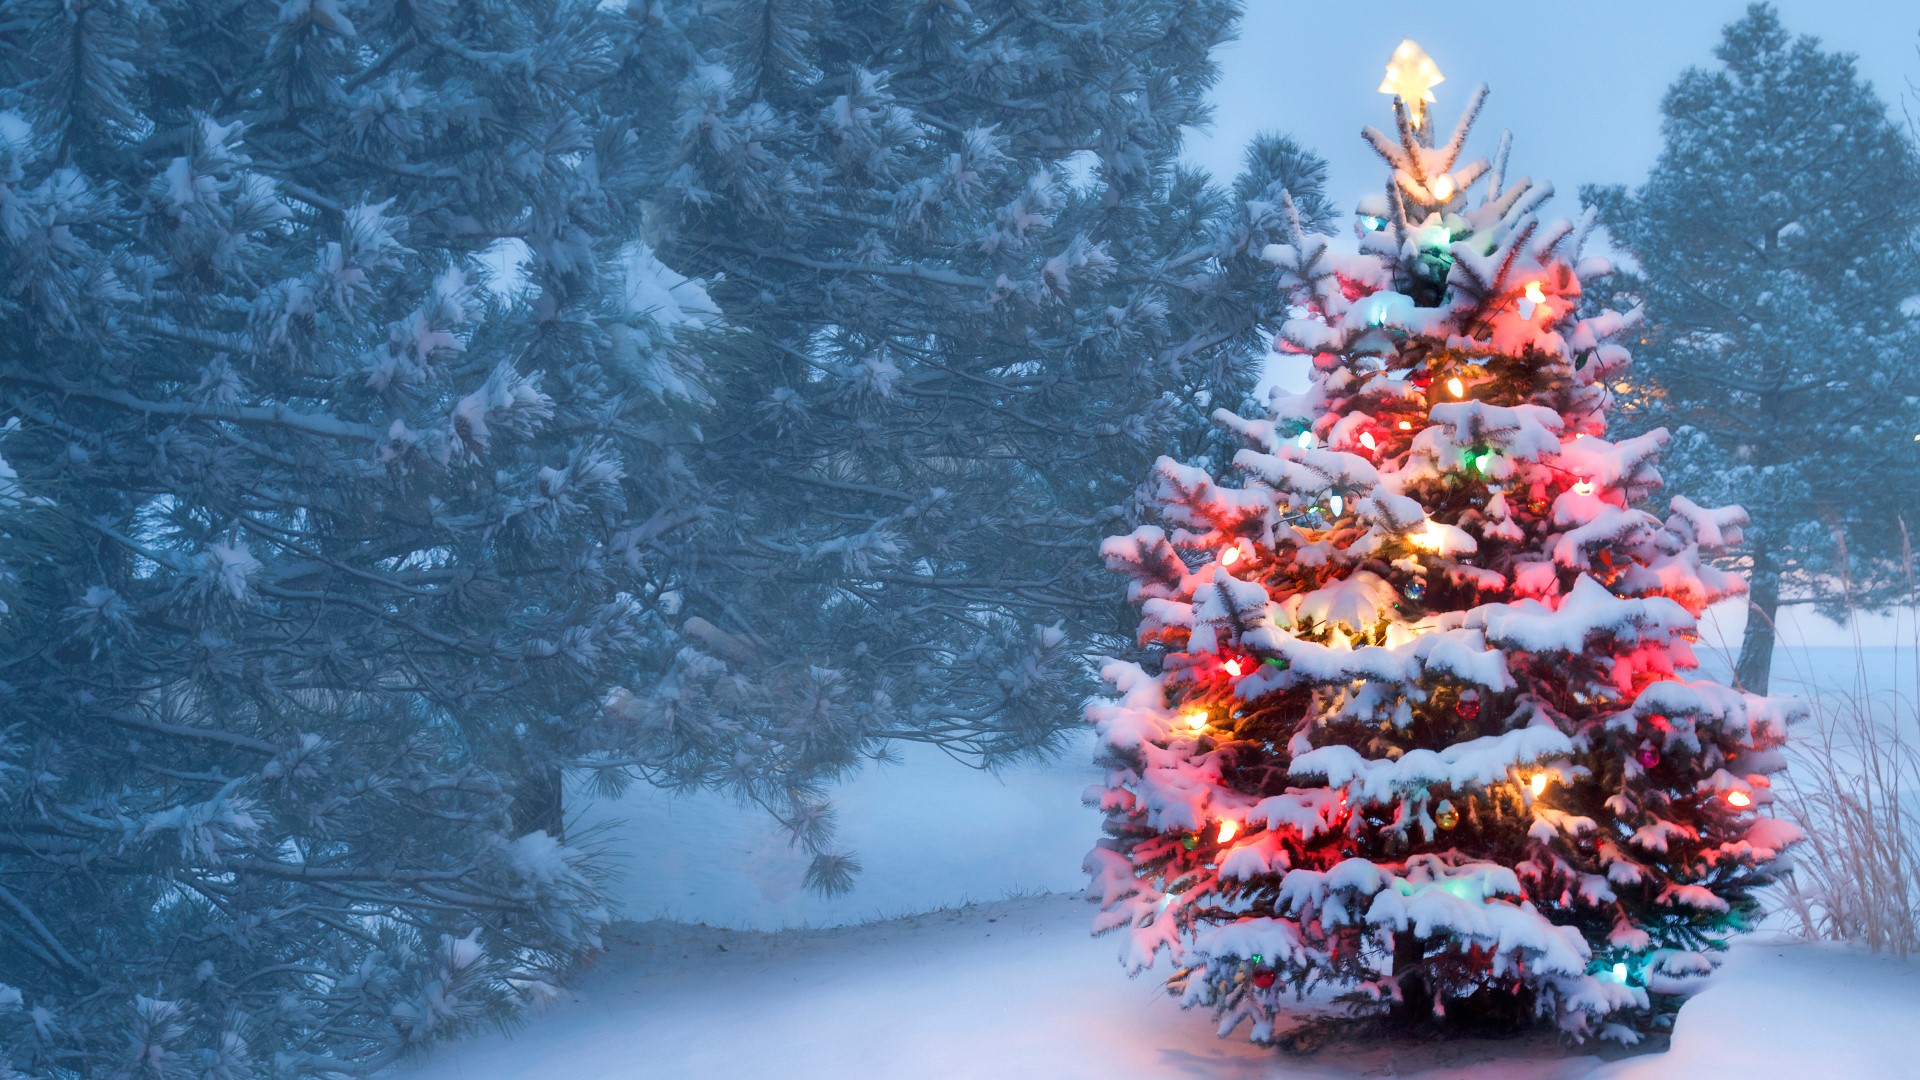 It's the most wonderful time of the year. Colorado celebrates the holiday season with parades, festivals, concerts, lightings and winter events.